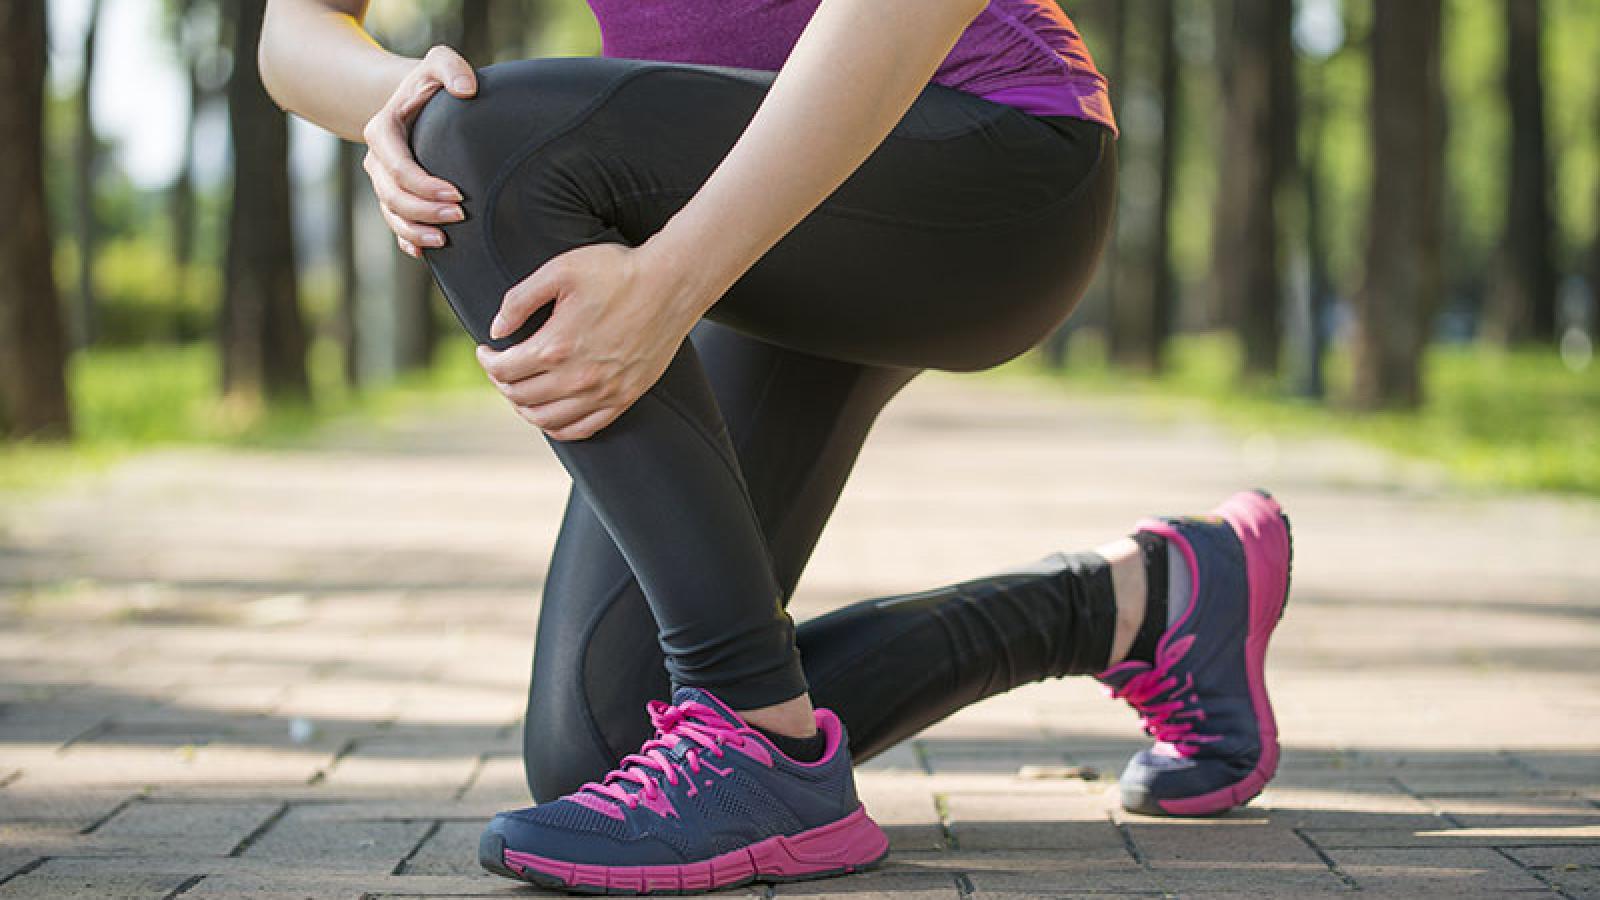 6 Reasons Why Your Joints Hurt